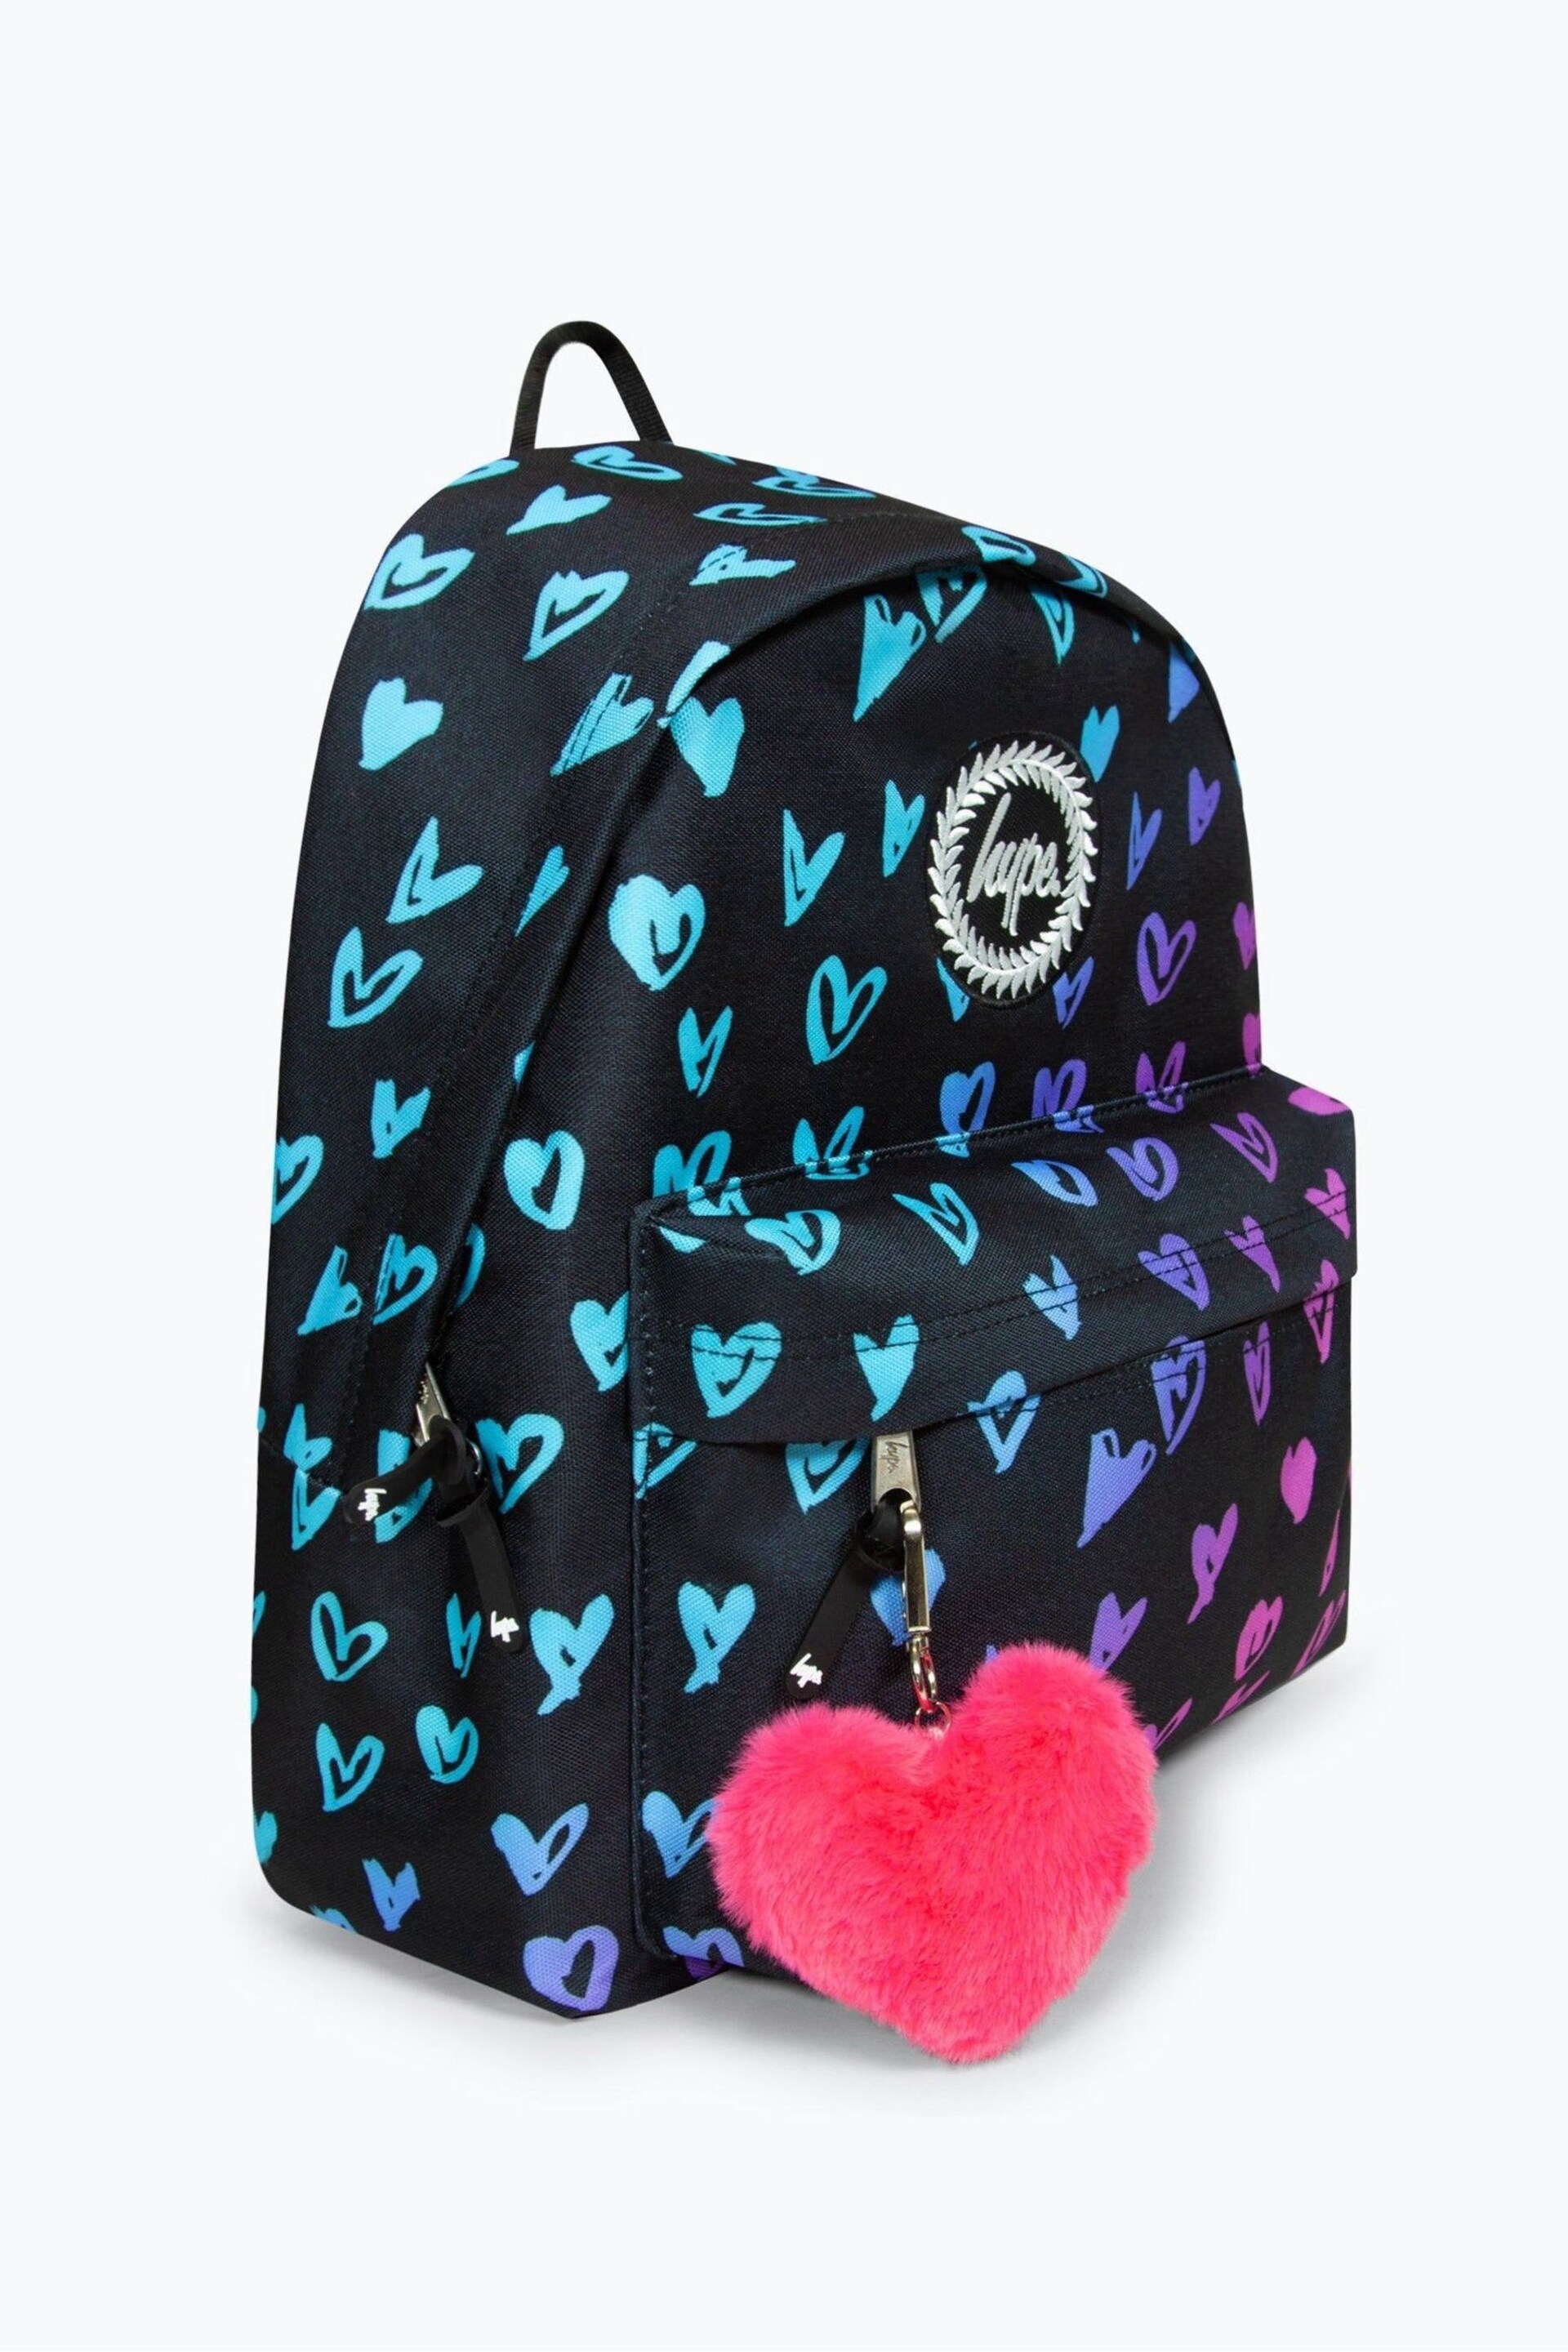 Hype. Scribble Hearts Pom Pom Backpack - Image 4 of 8